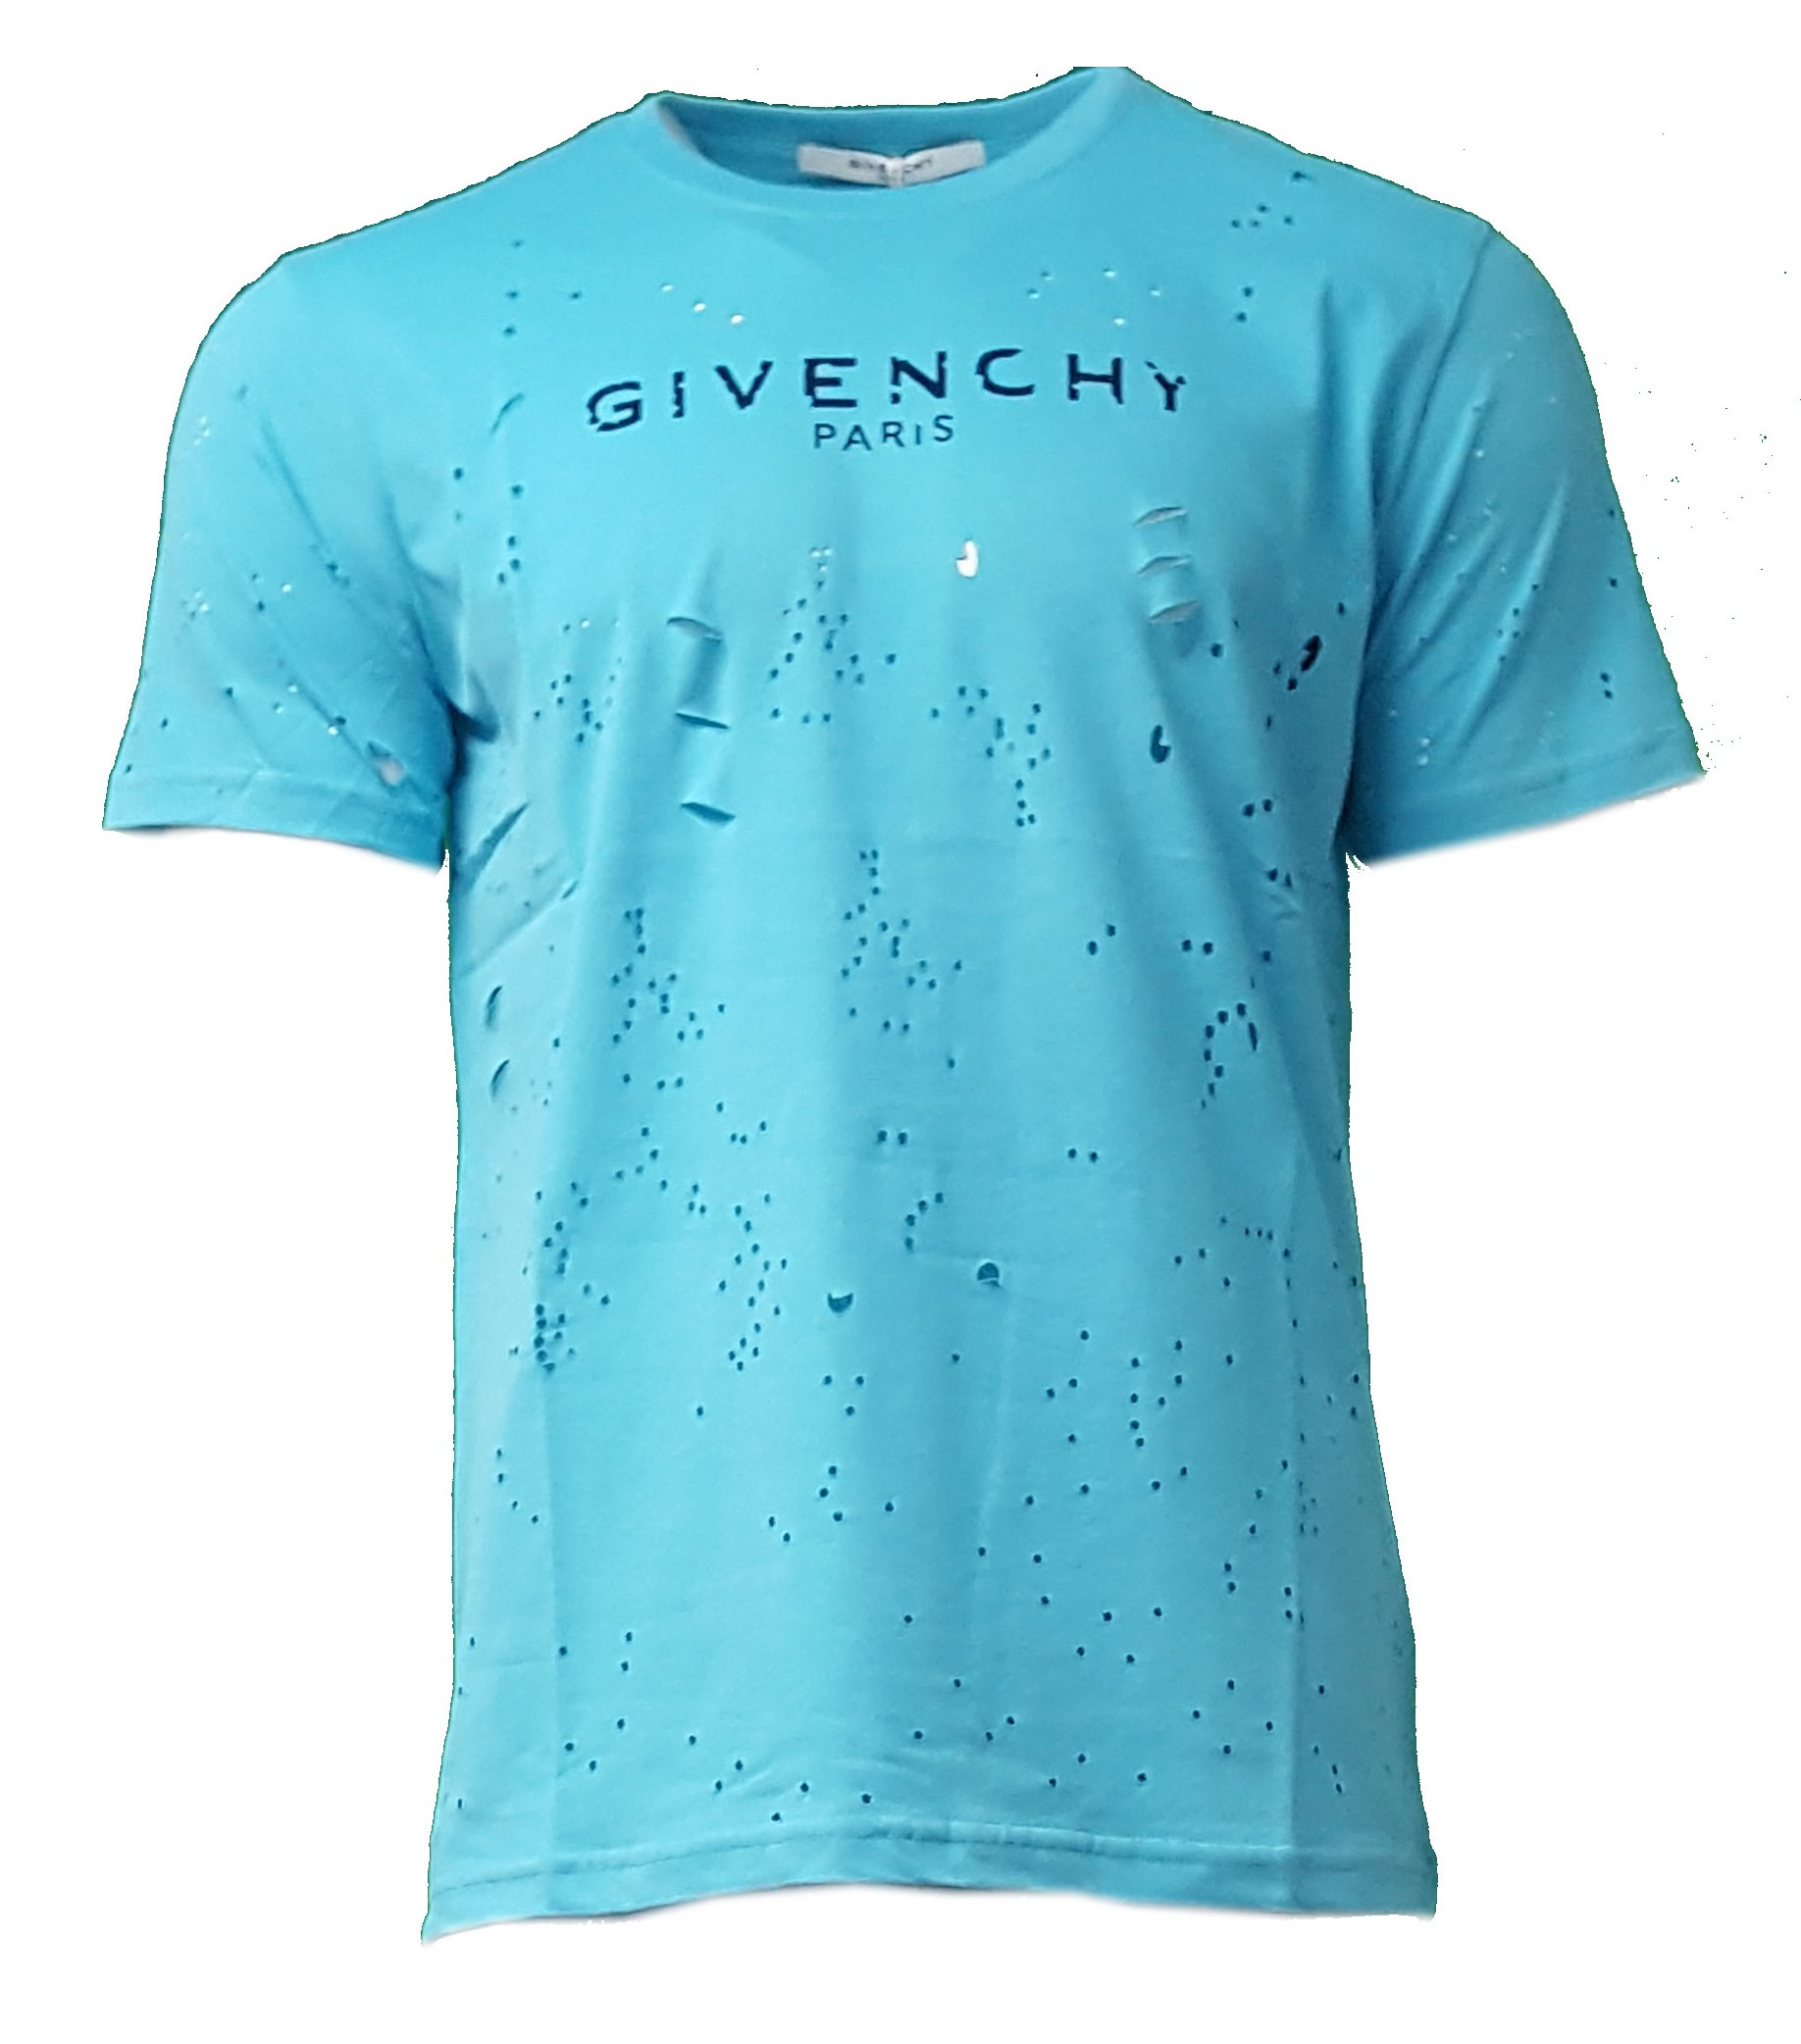 Givenchy Paris Short Sleeve Crew T Shirt. Destroyed Print in Sky Blue ...